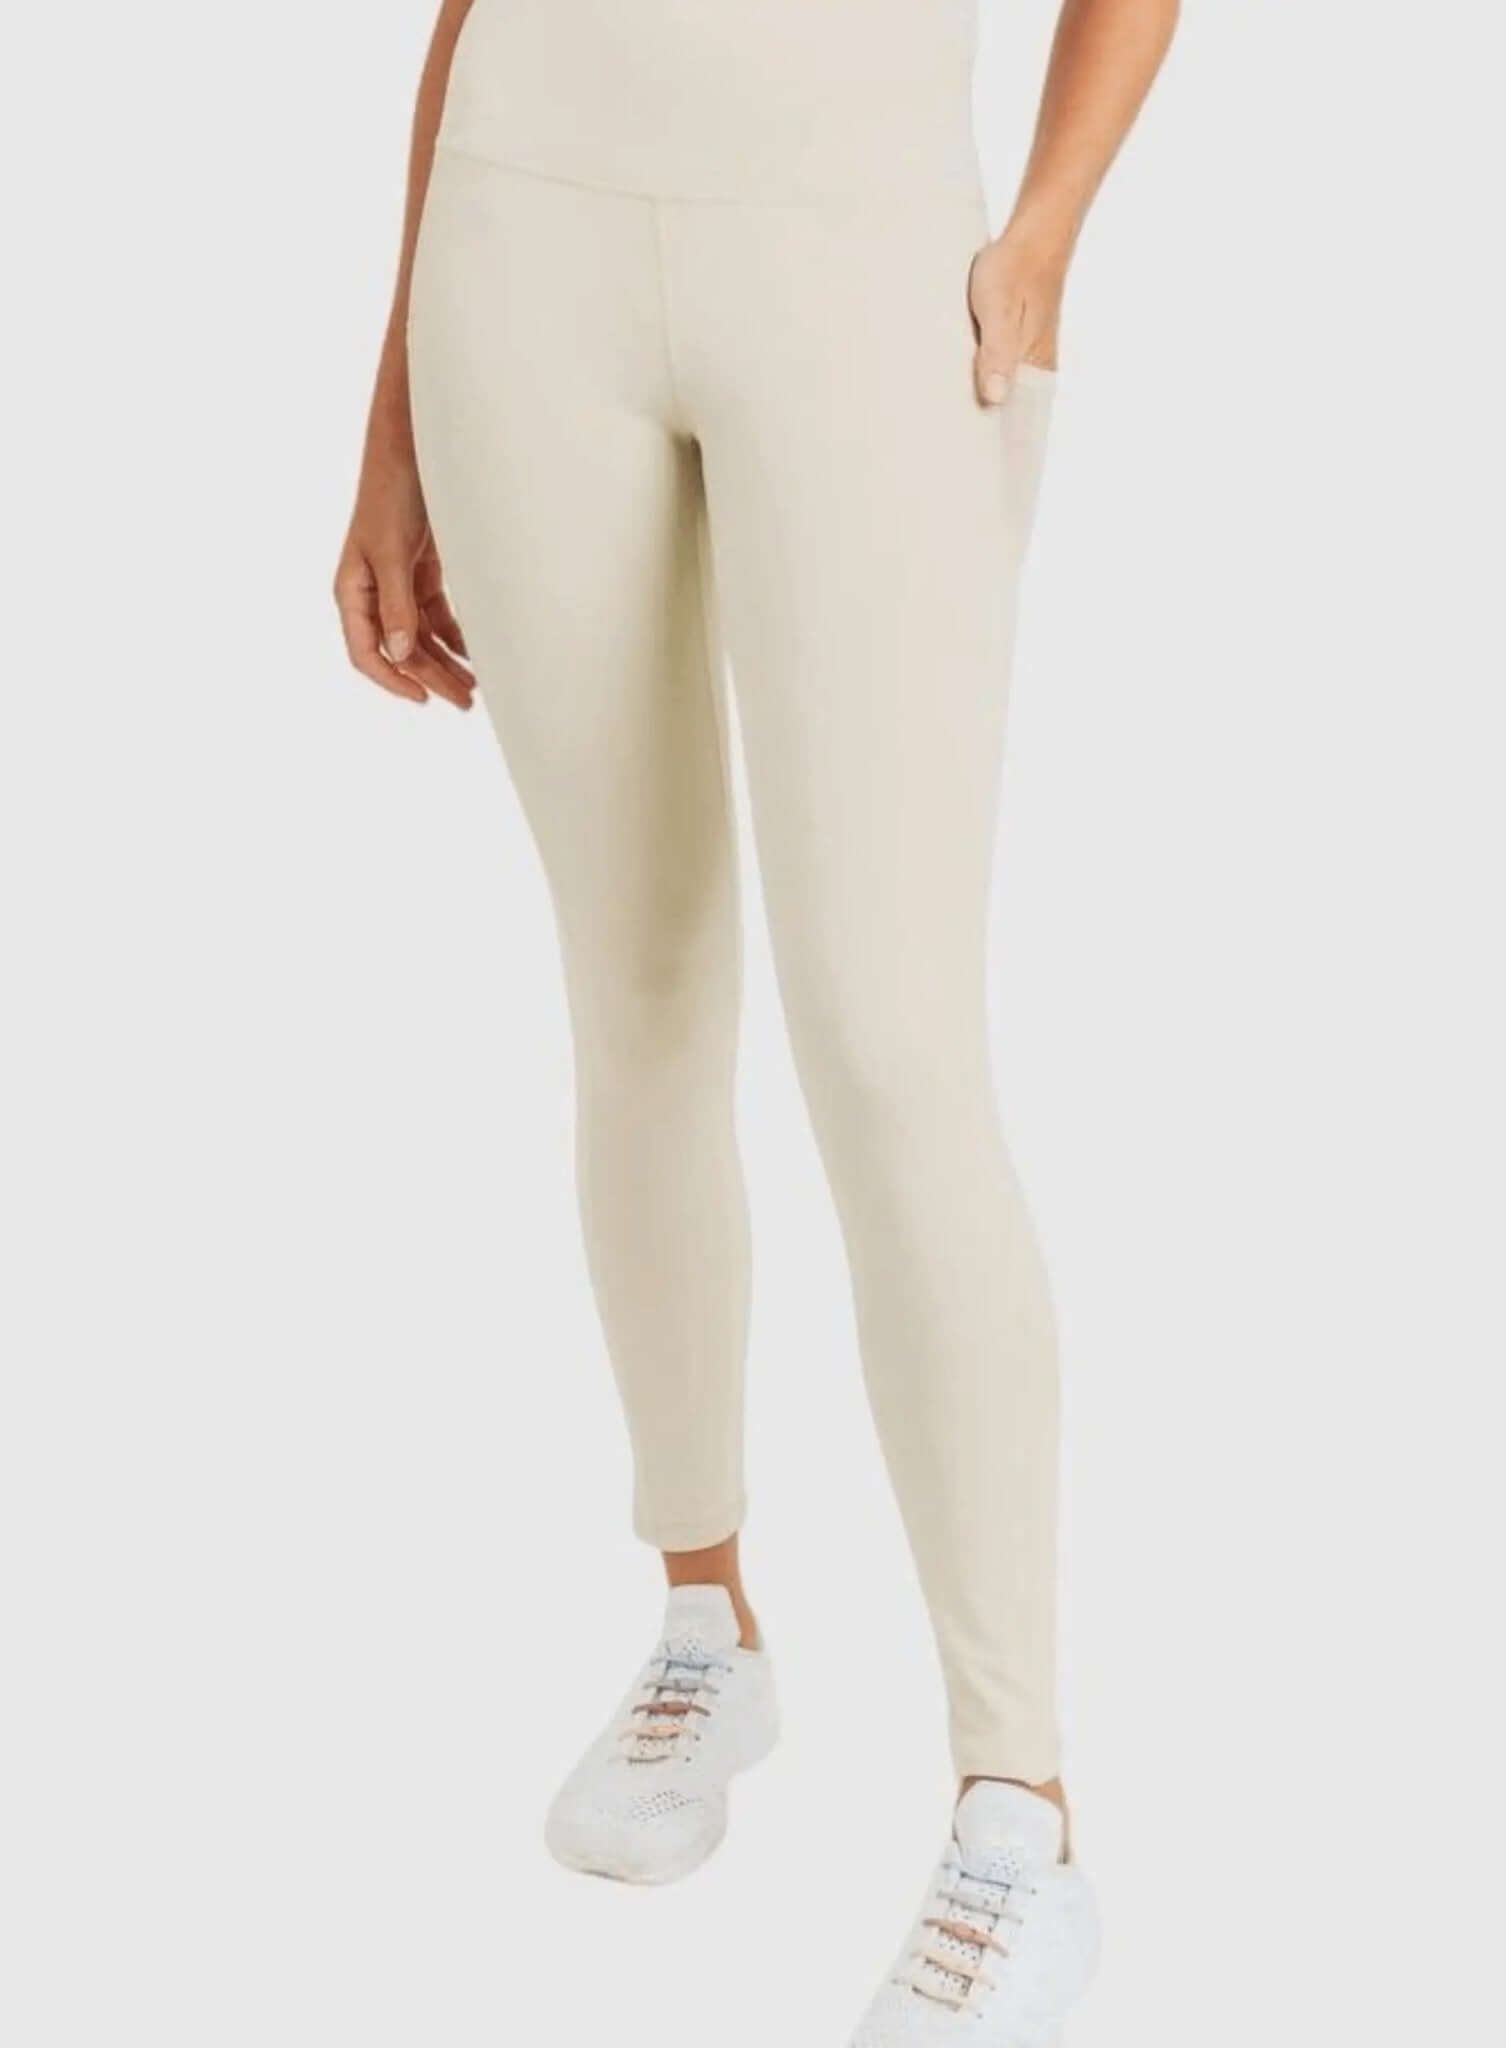 Performance High Waisted Leggings with Mesh Pockets - Rocca & Co